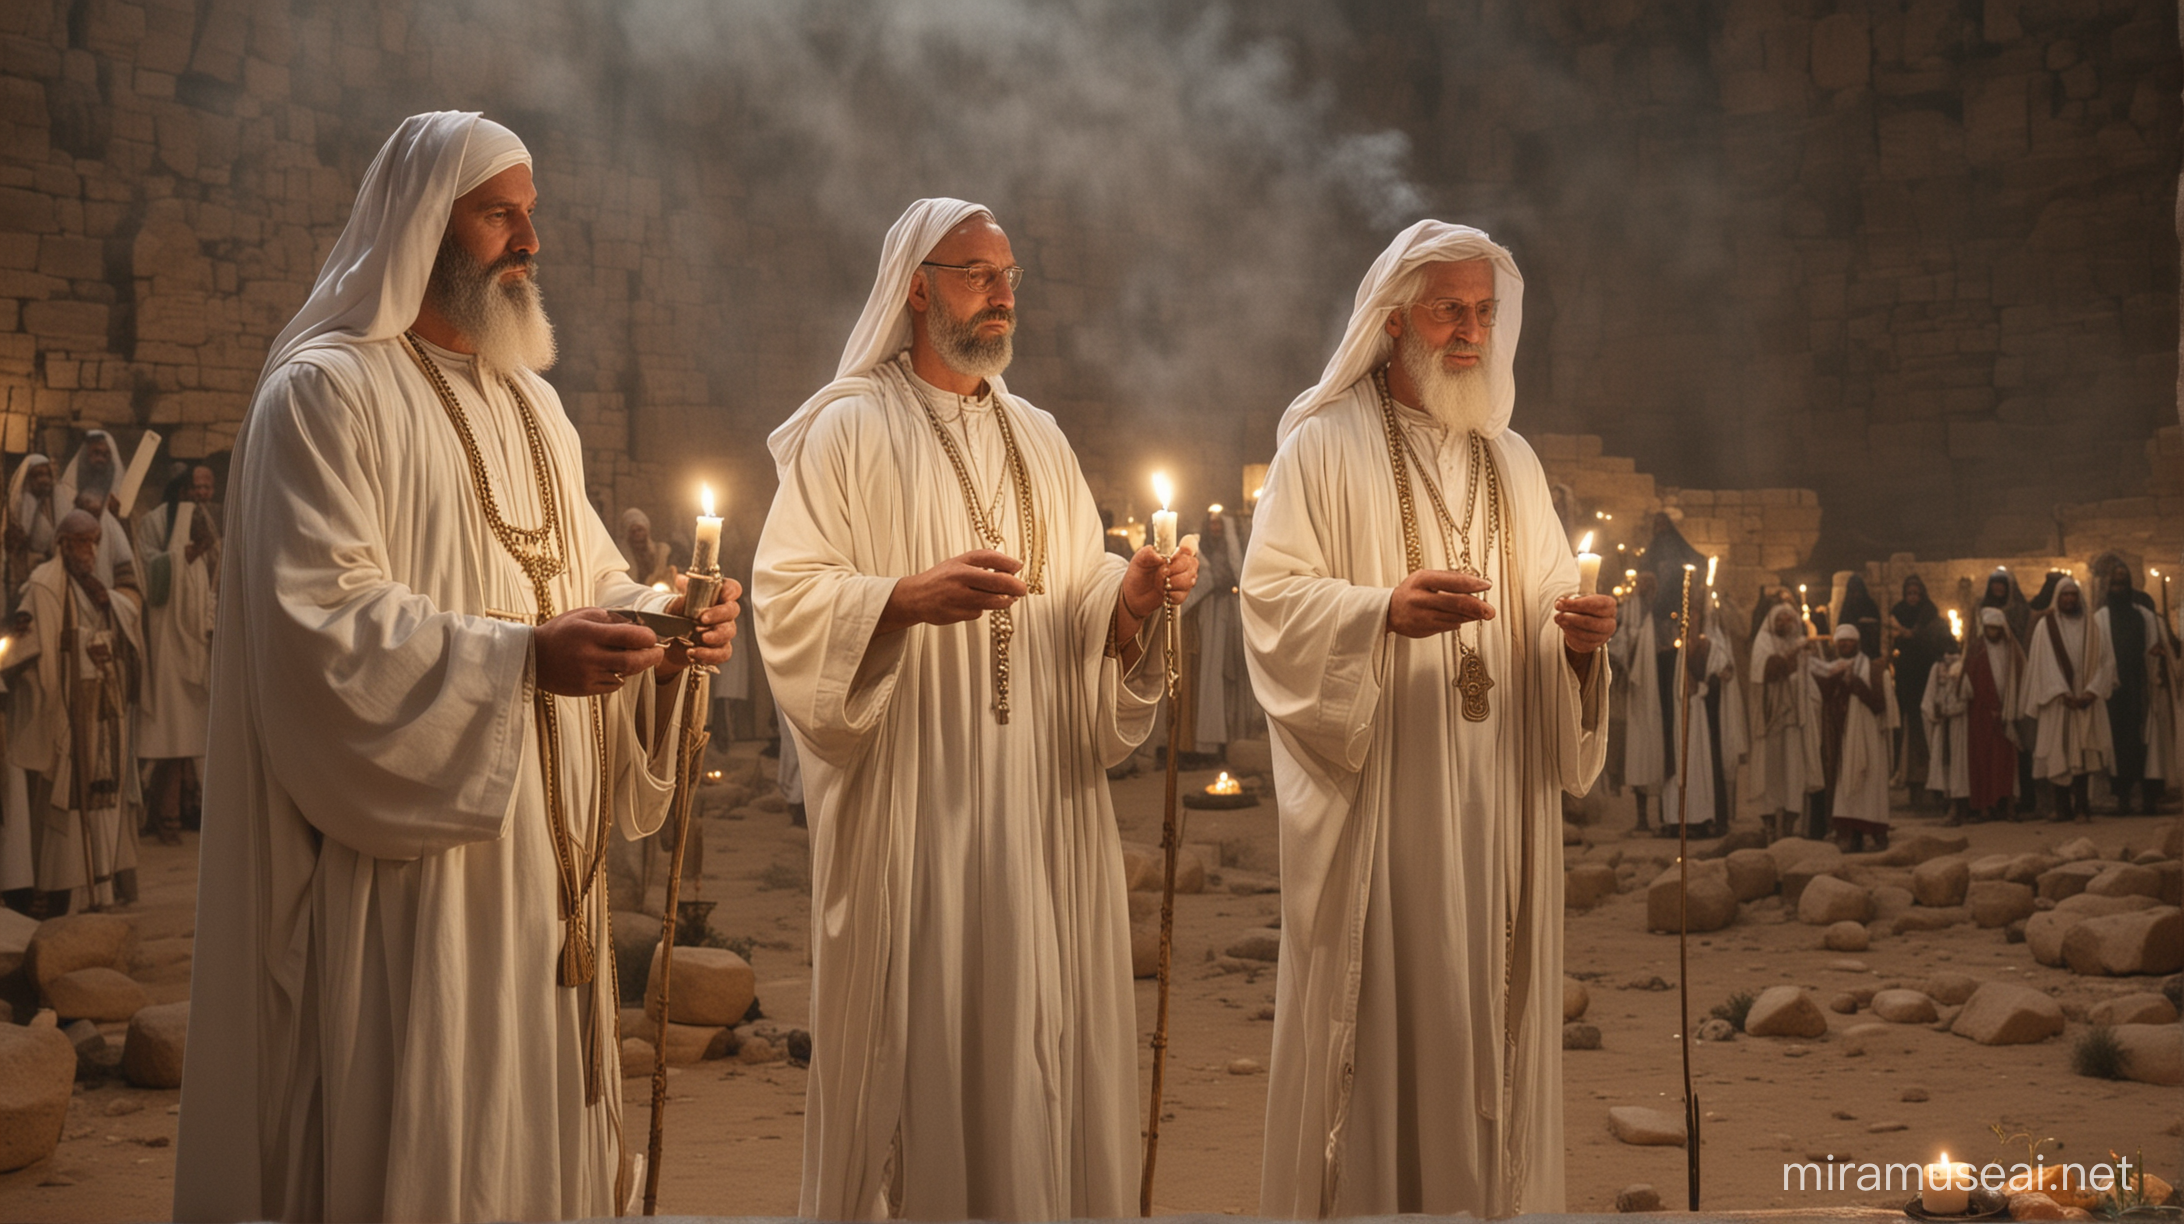 Levitical Priests Illuminating Candles in Ancient Moses Era